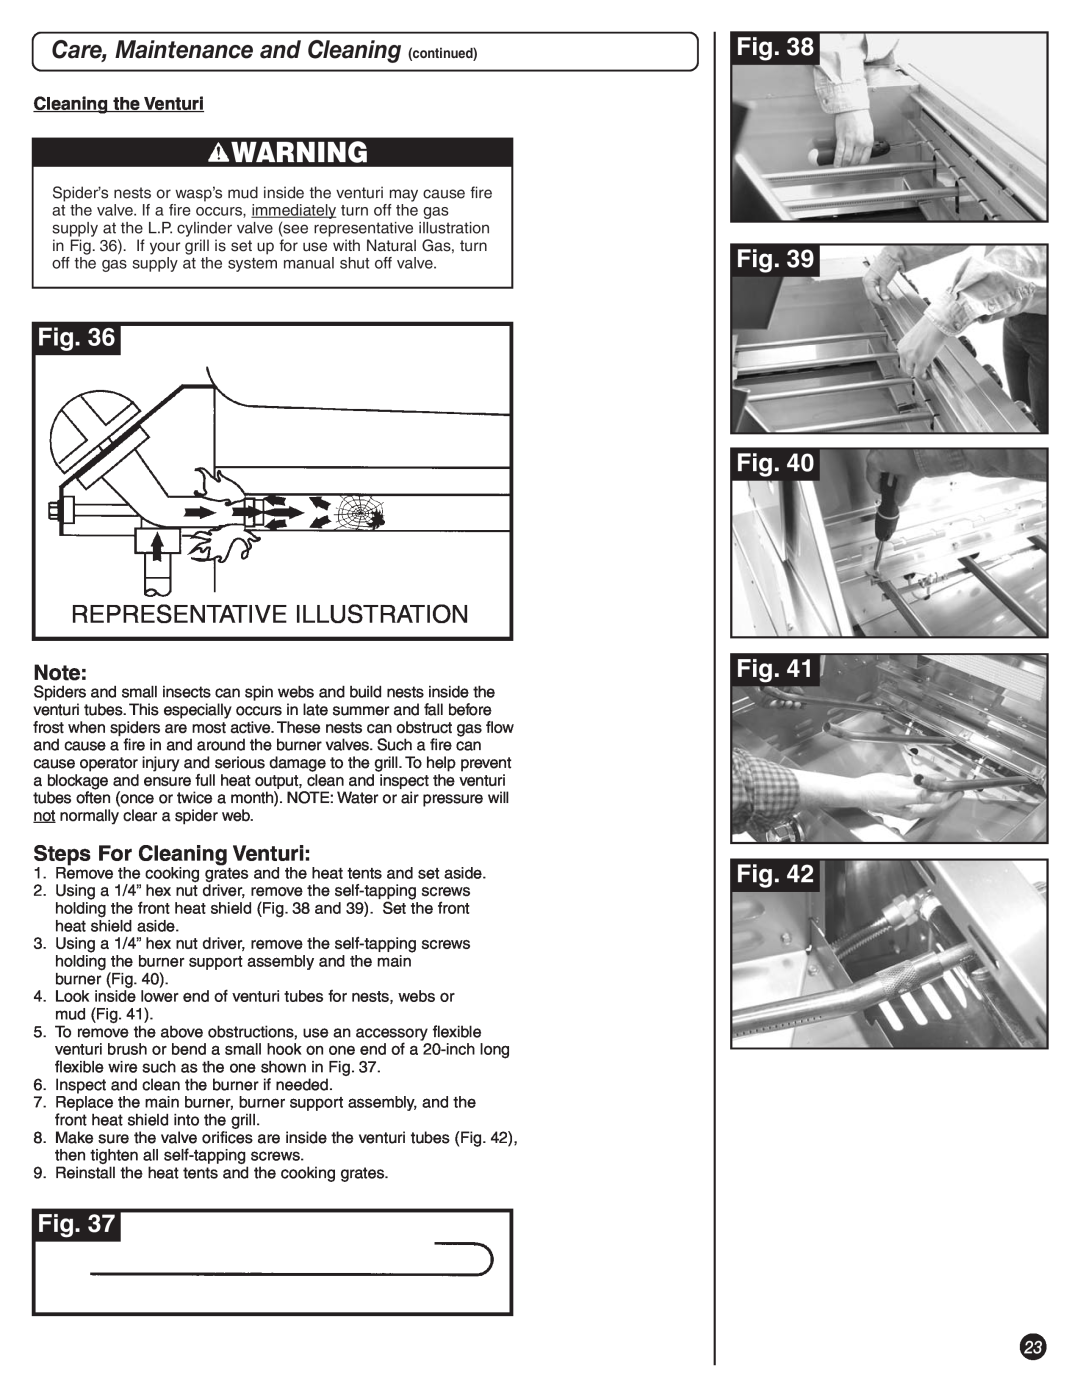 Coleman 8450 Series Care, Maintenance and Cleaning continued, Representative Illustration, Steps For Cleaning Venturi 